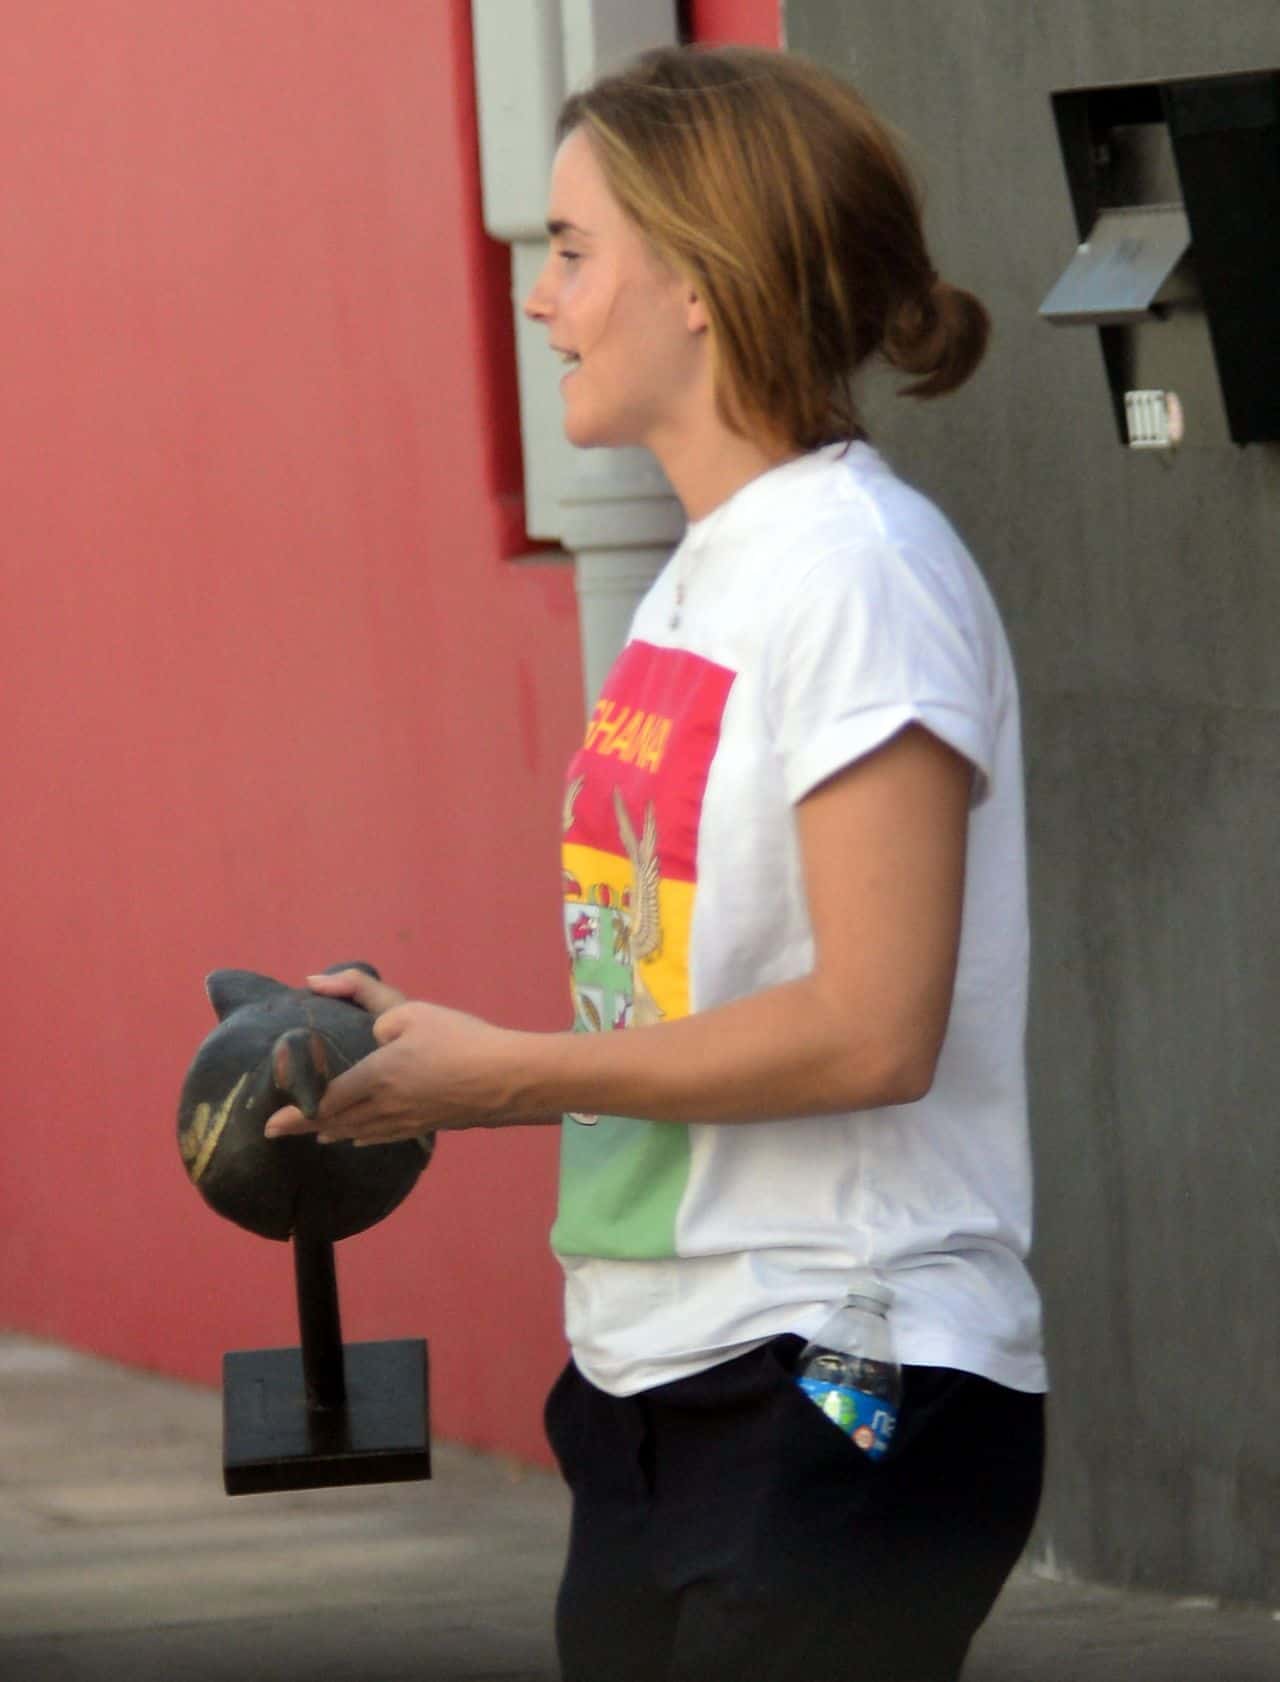 Emma Watson Furniture Shops in West Hollywood - 1